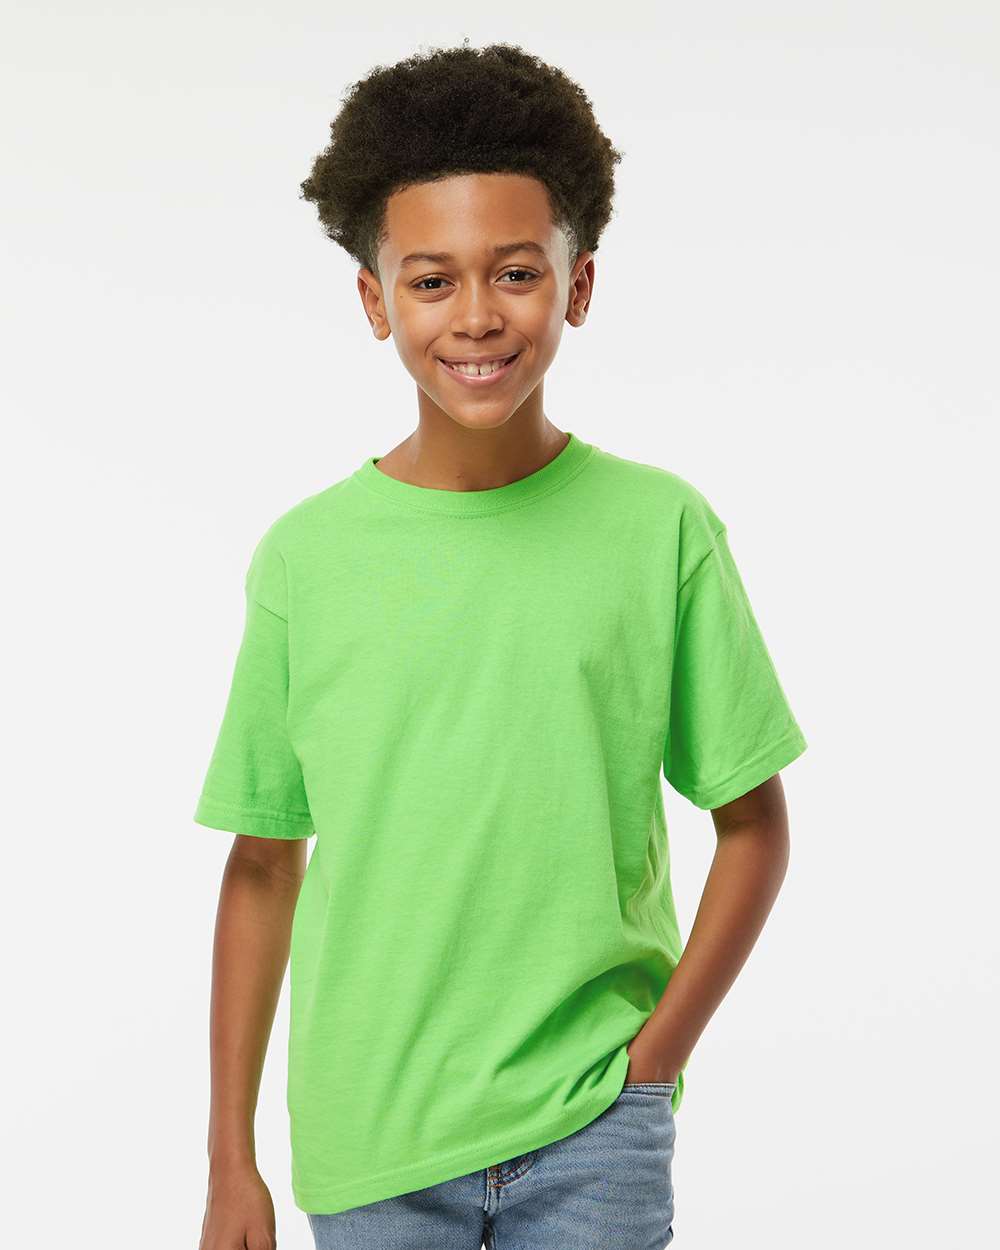 M&O Youth Gold Soft Touch T-Shirt 4850 #colormdl_Vivid Lime